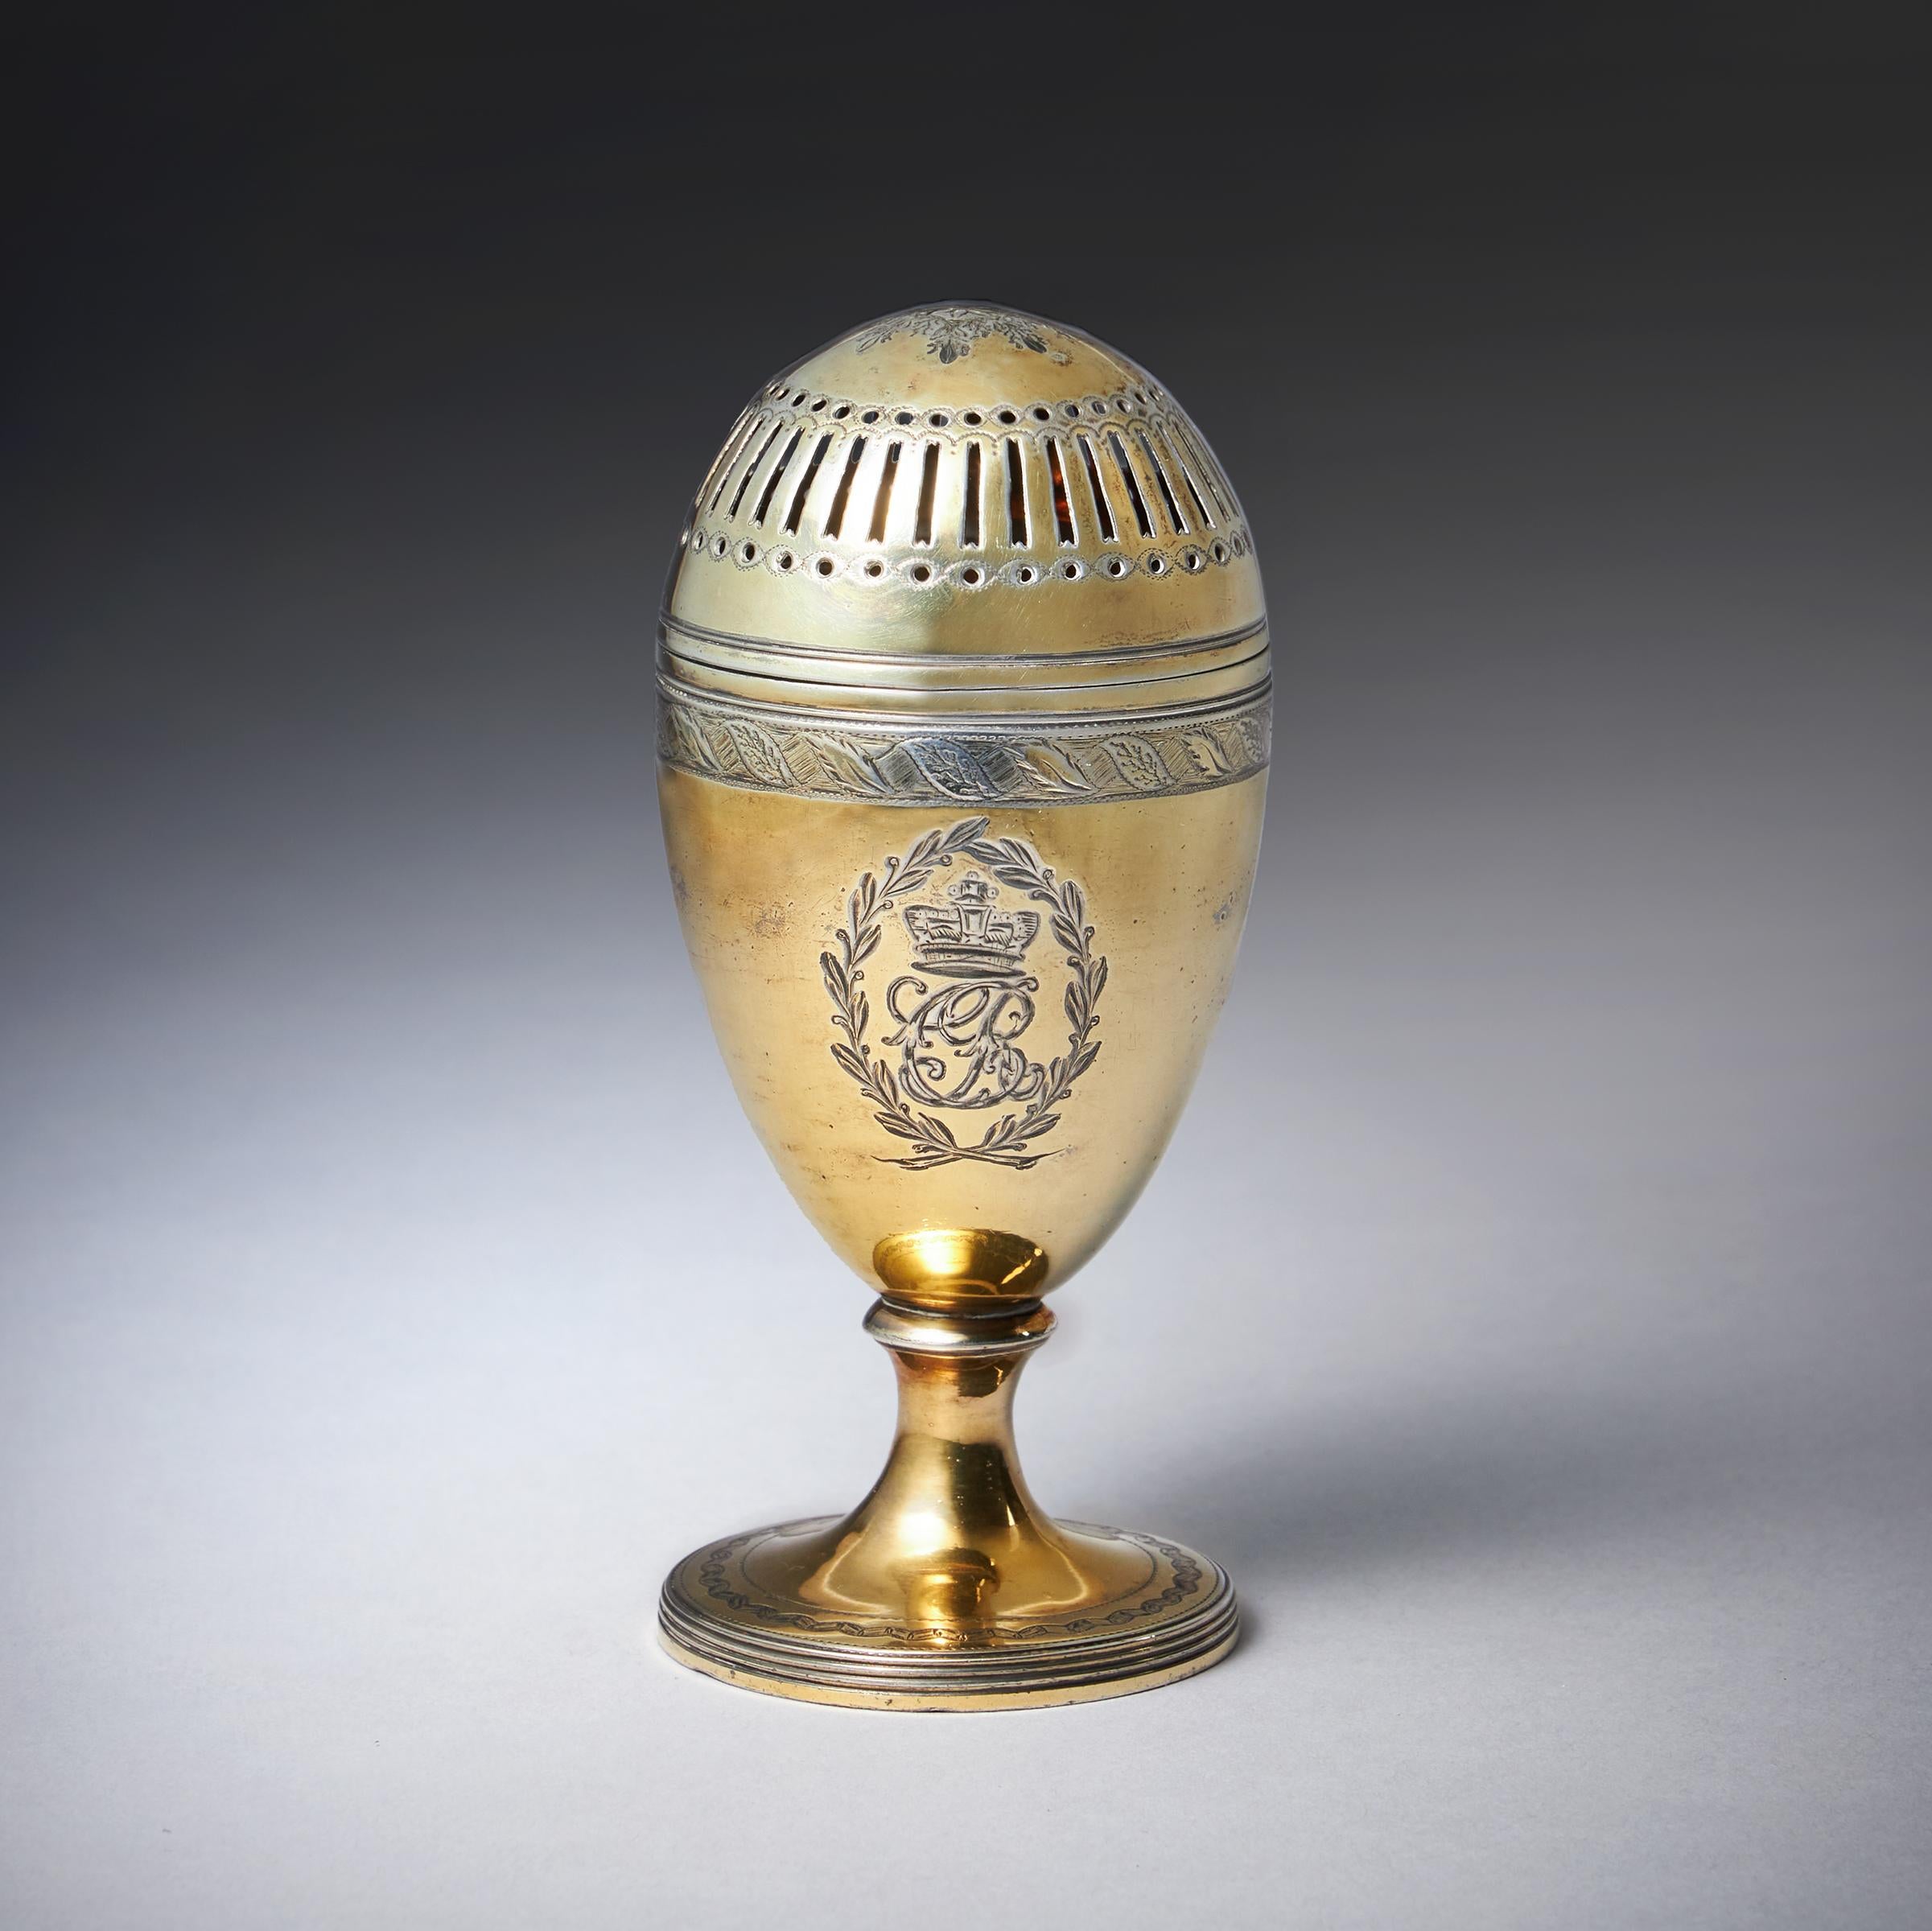 Royal Interest 

A George III silver-gilt pepper pot by John Emes, London 1798. Engraved cypher of Queen Charlotte

The vase outline is with an engraved cypher of Queen Charlotte in a laurel wreath and a foliate border to the rim. the domed